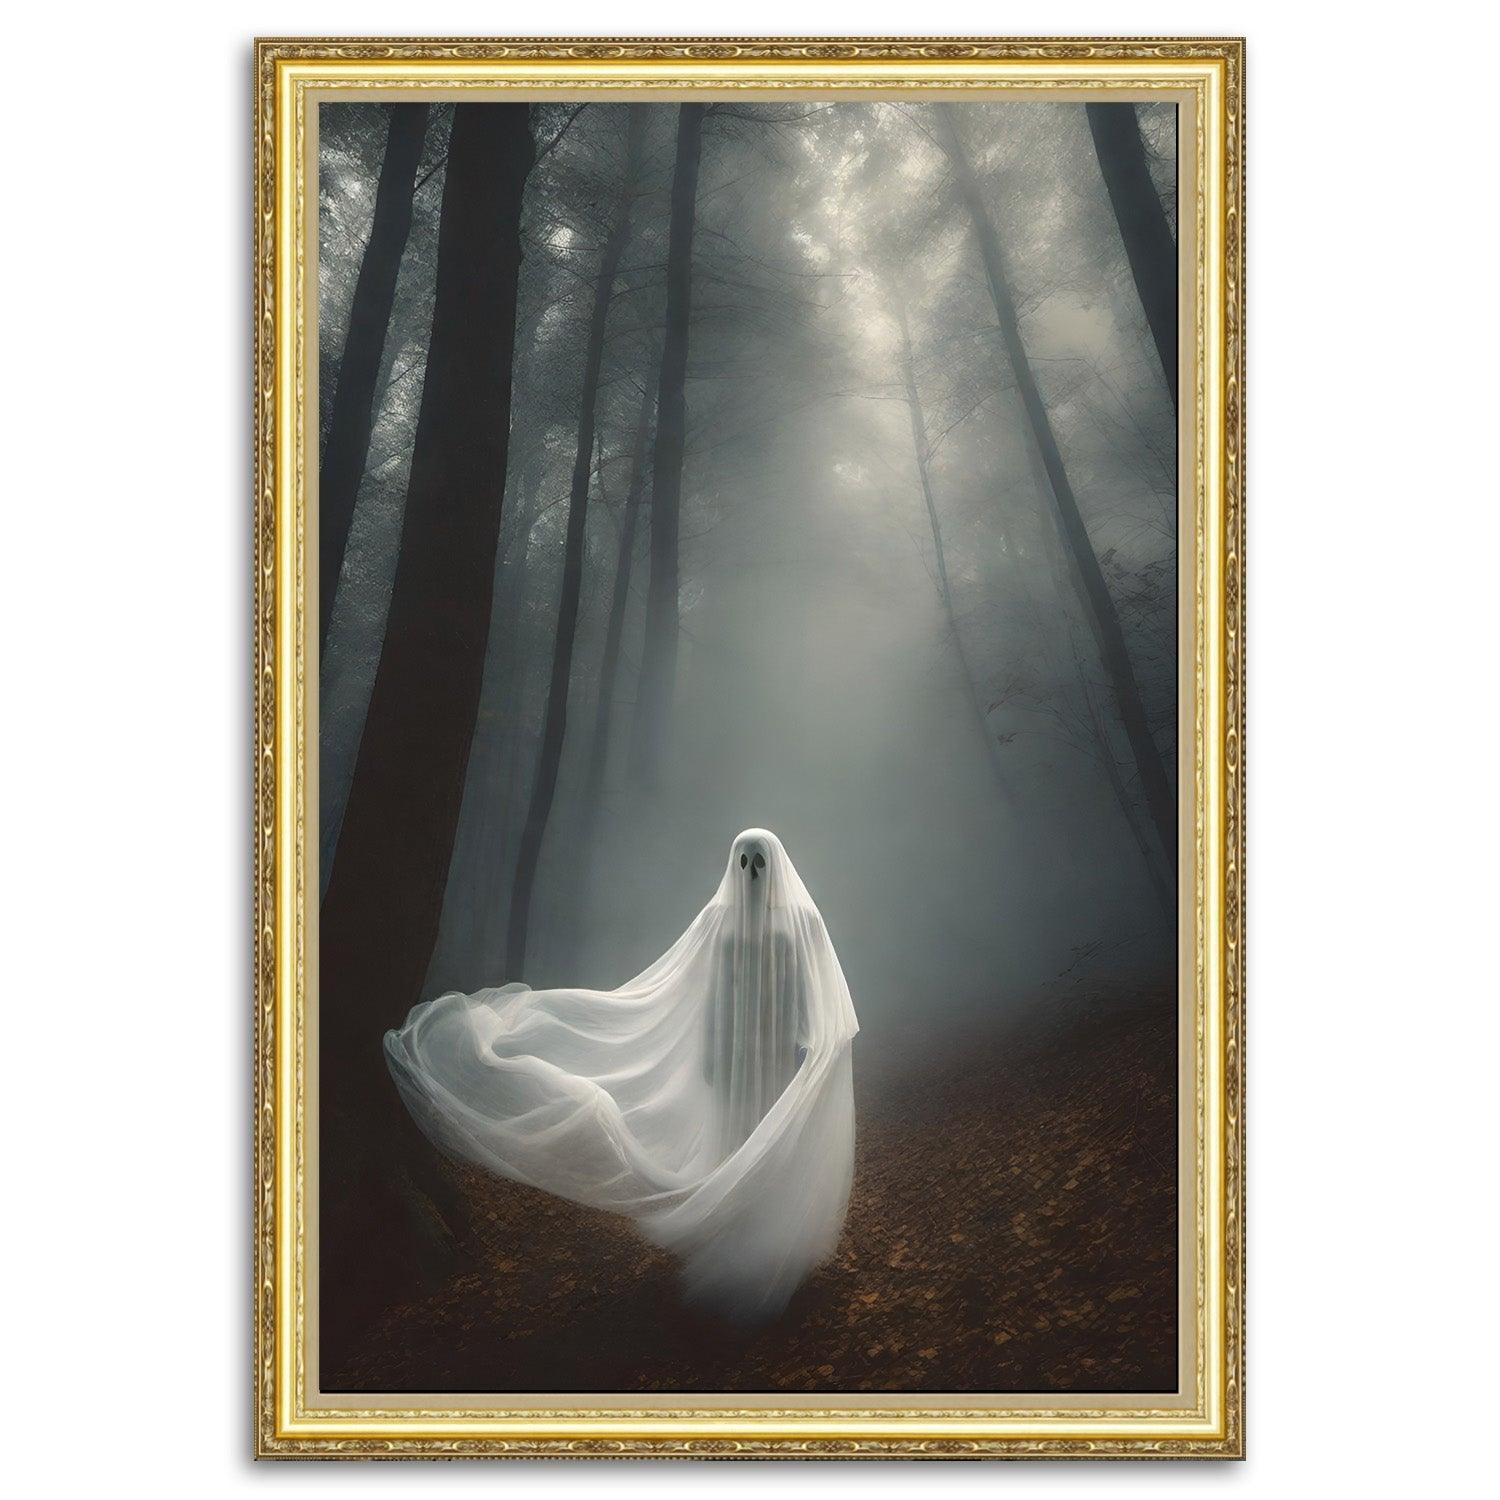 Delve into the depths of darkness with our Dark Art collection, where ghostly apparitions and moonlit whispers evoke emotions that words cannot capture.